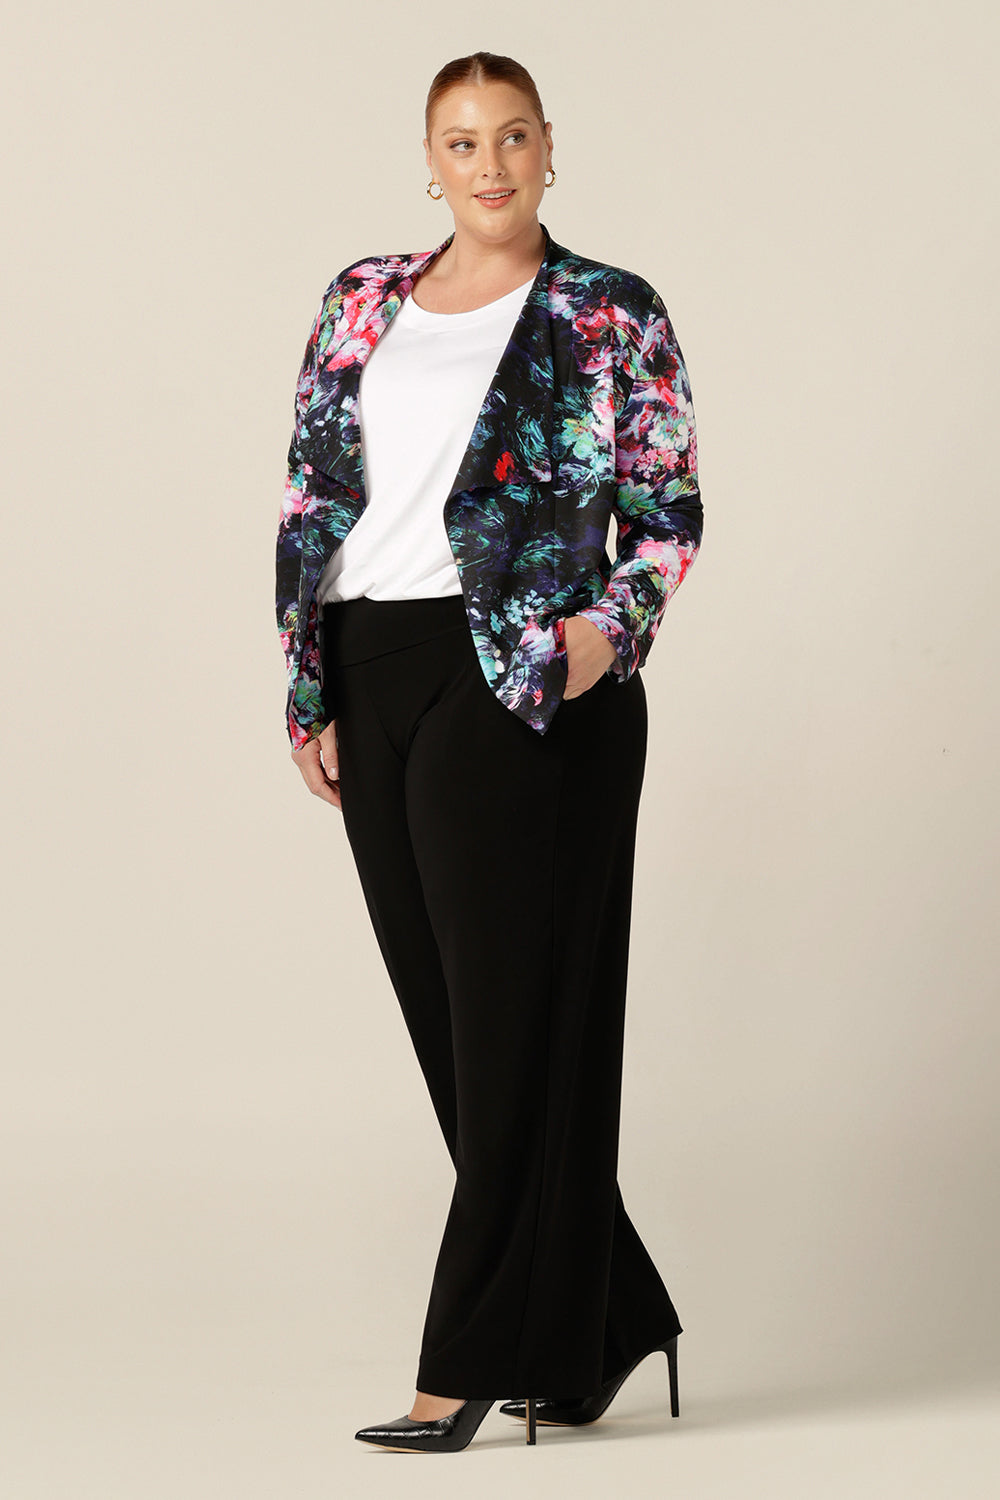 Made in Australia, this is an abstract, floral print jacket on a black scuba base. Worn with black straight leg pants and a white top in bamboo jersey, this jacket creates easy elegant workwear or smart-casual weekend wear. Shop with free shipping to new Zealand.